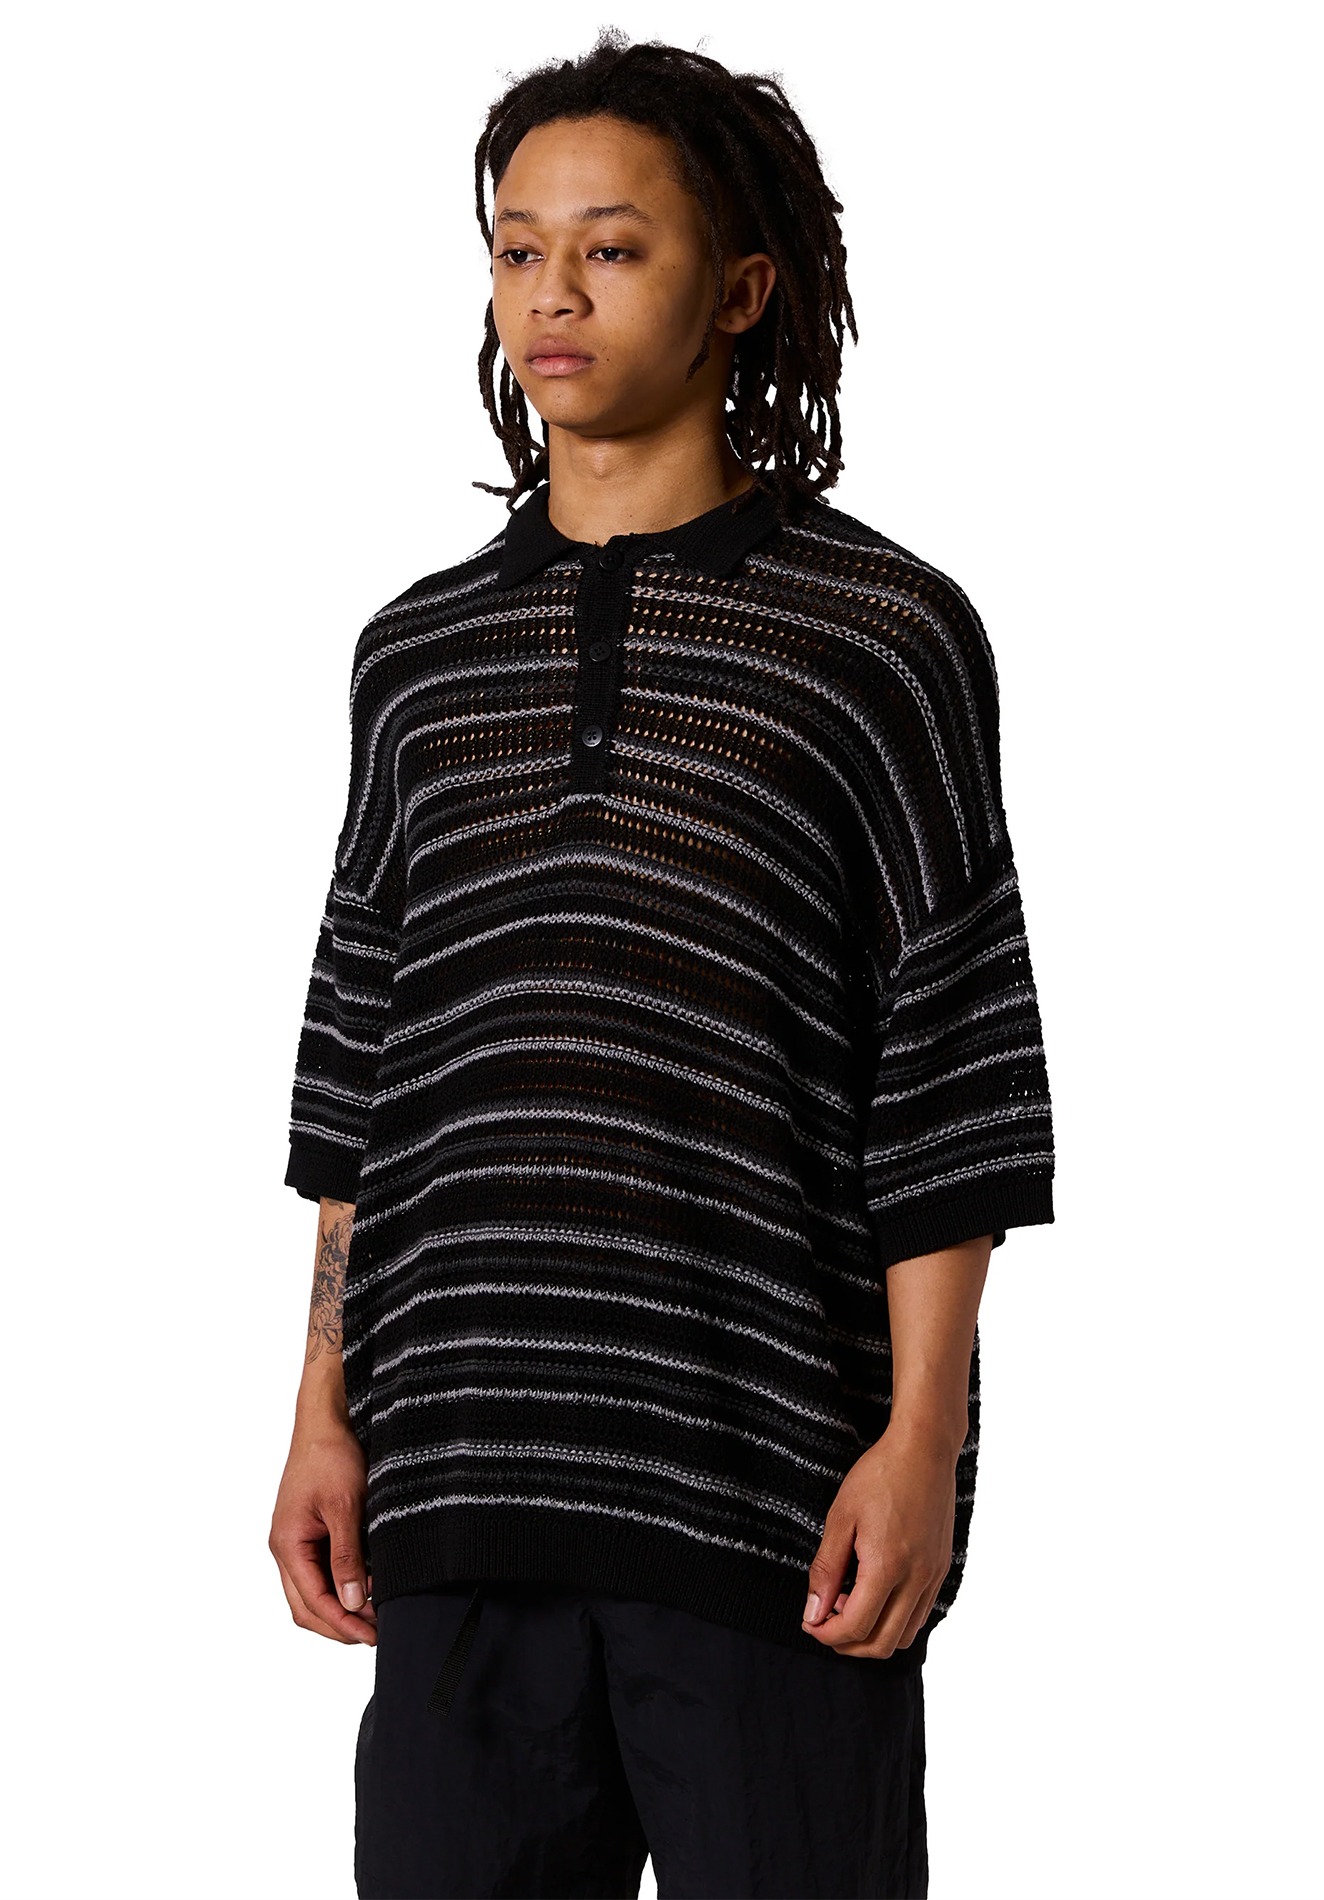 RESEARCHED KNIT POLO SS / C,L MIX YARN BORDER, BLACK